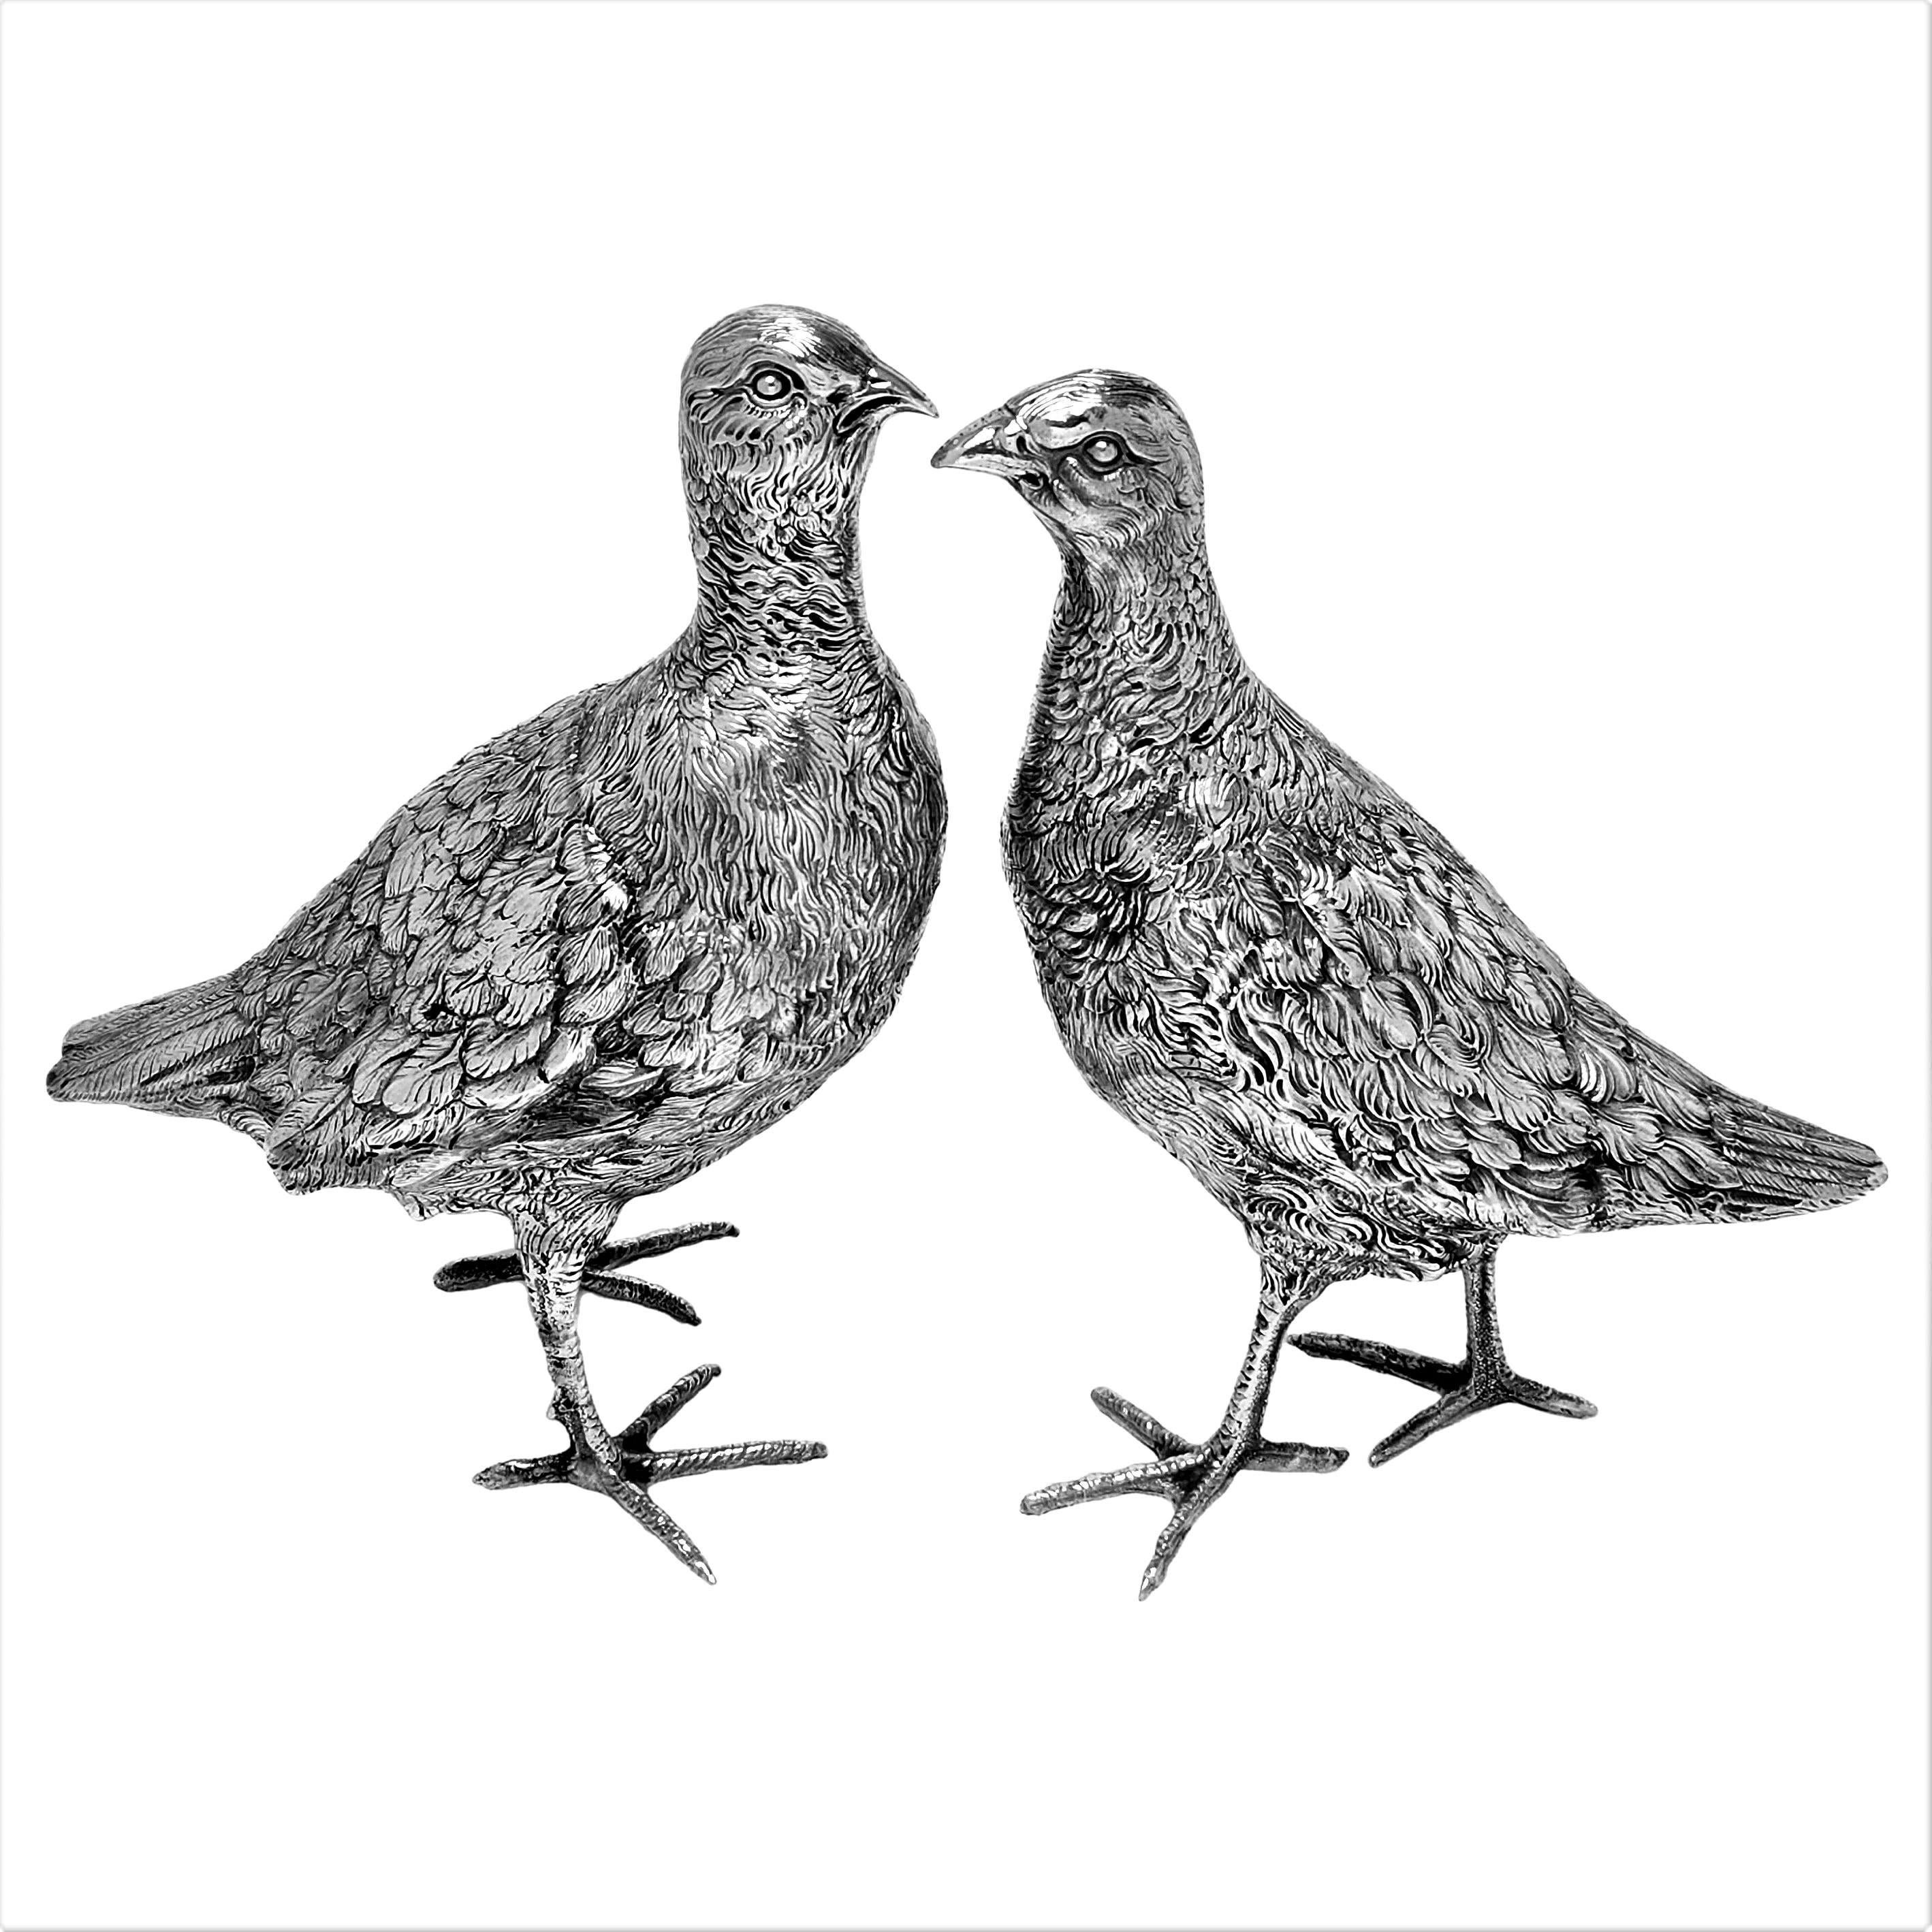 A pair of impressive solid silver models of Grouse of substantial size. Each Bird is modelled with a lovely attention to detail.

Made in Germany in c. 1910.

Approx. Weight - 1472g / 47.33oz
Approx. Height 1 - 25cm
Approx. Height 2 -